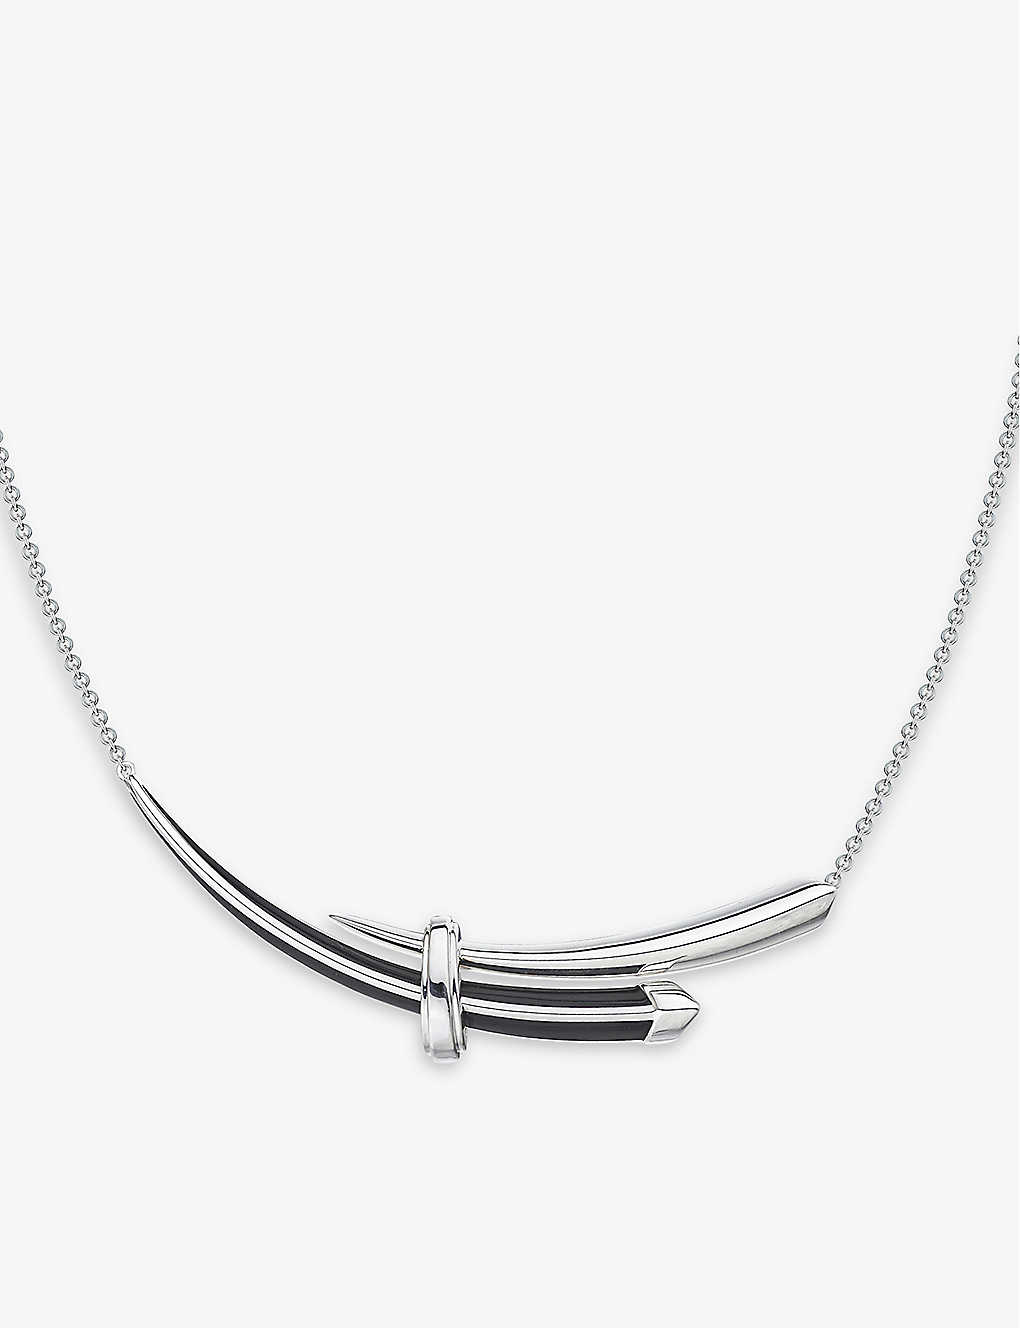 Shop Shaun Leane Women's Silver Sabre Sterling Silver And Ceramic Necklace